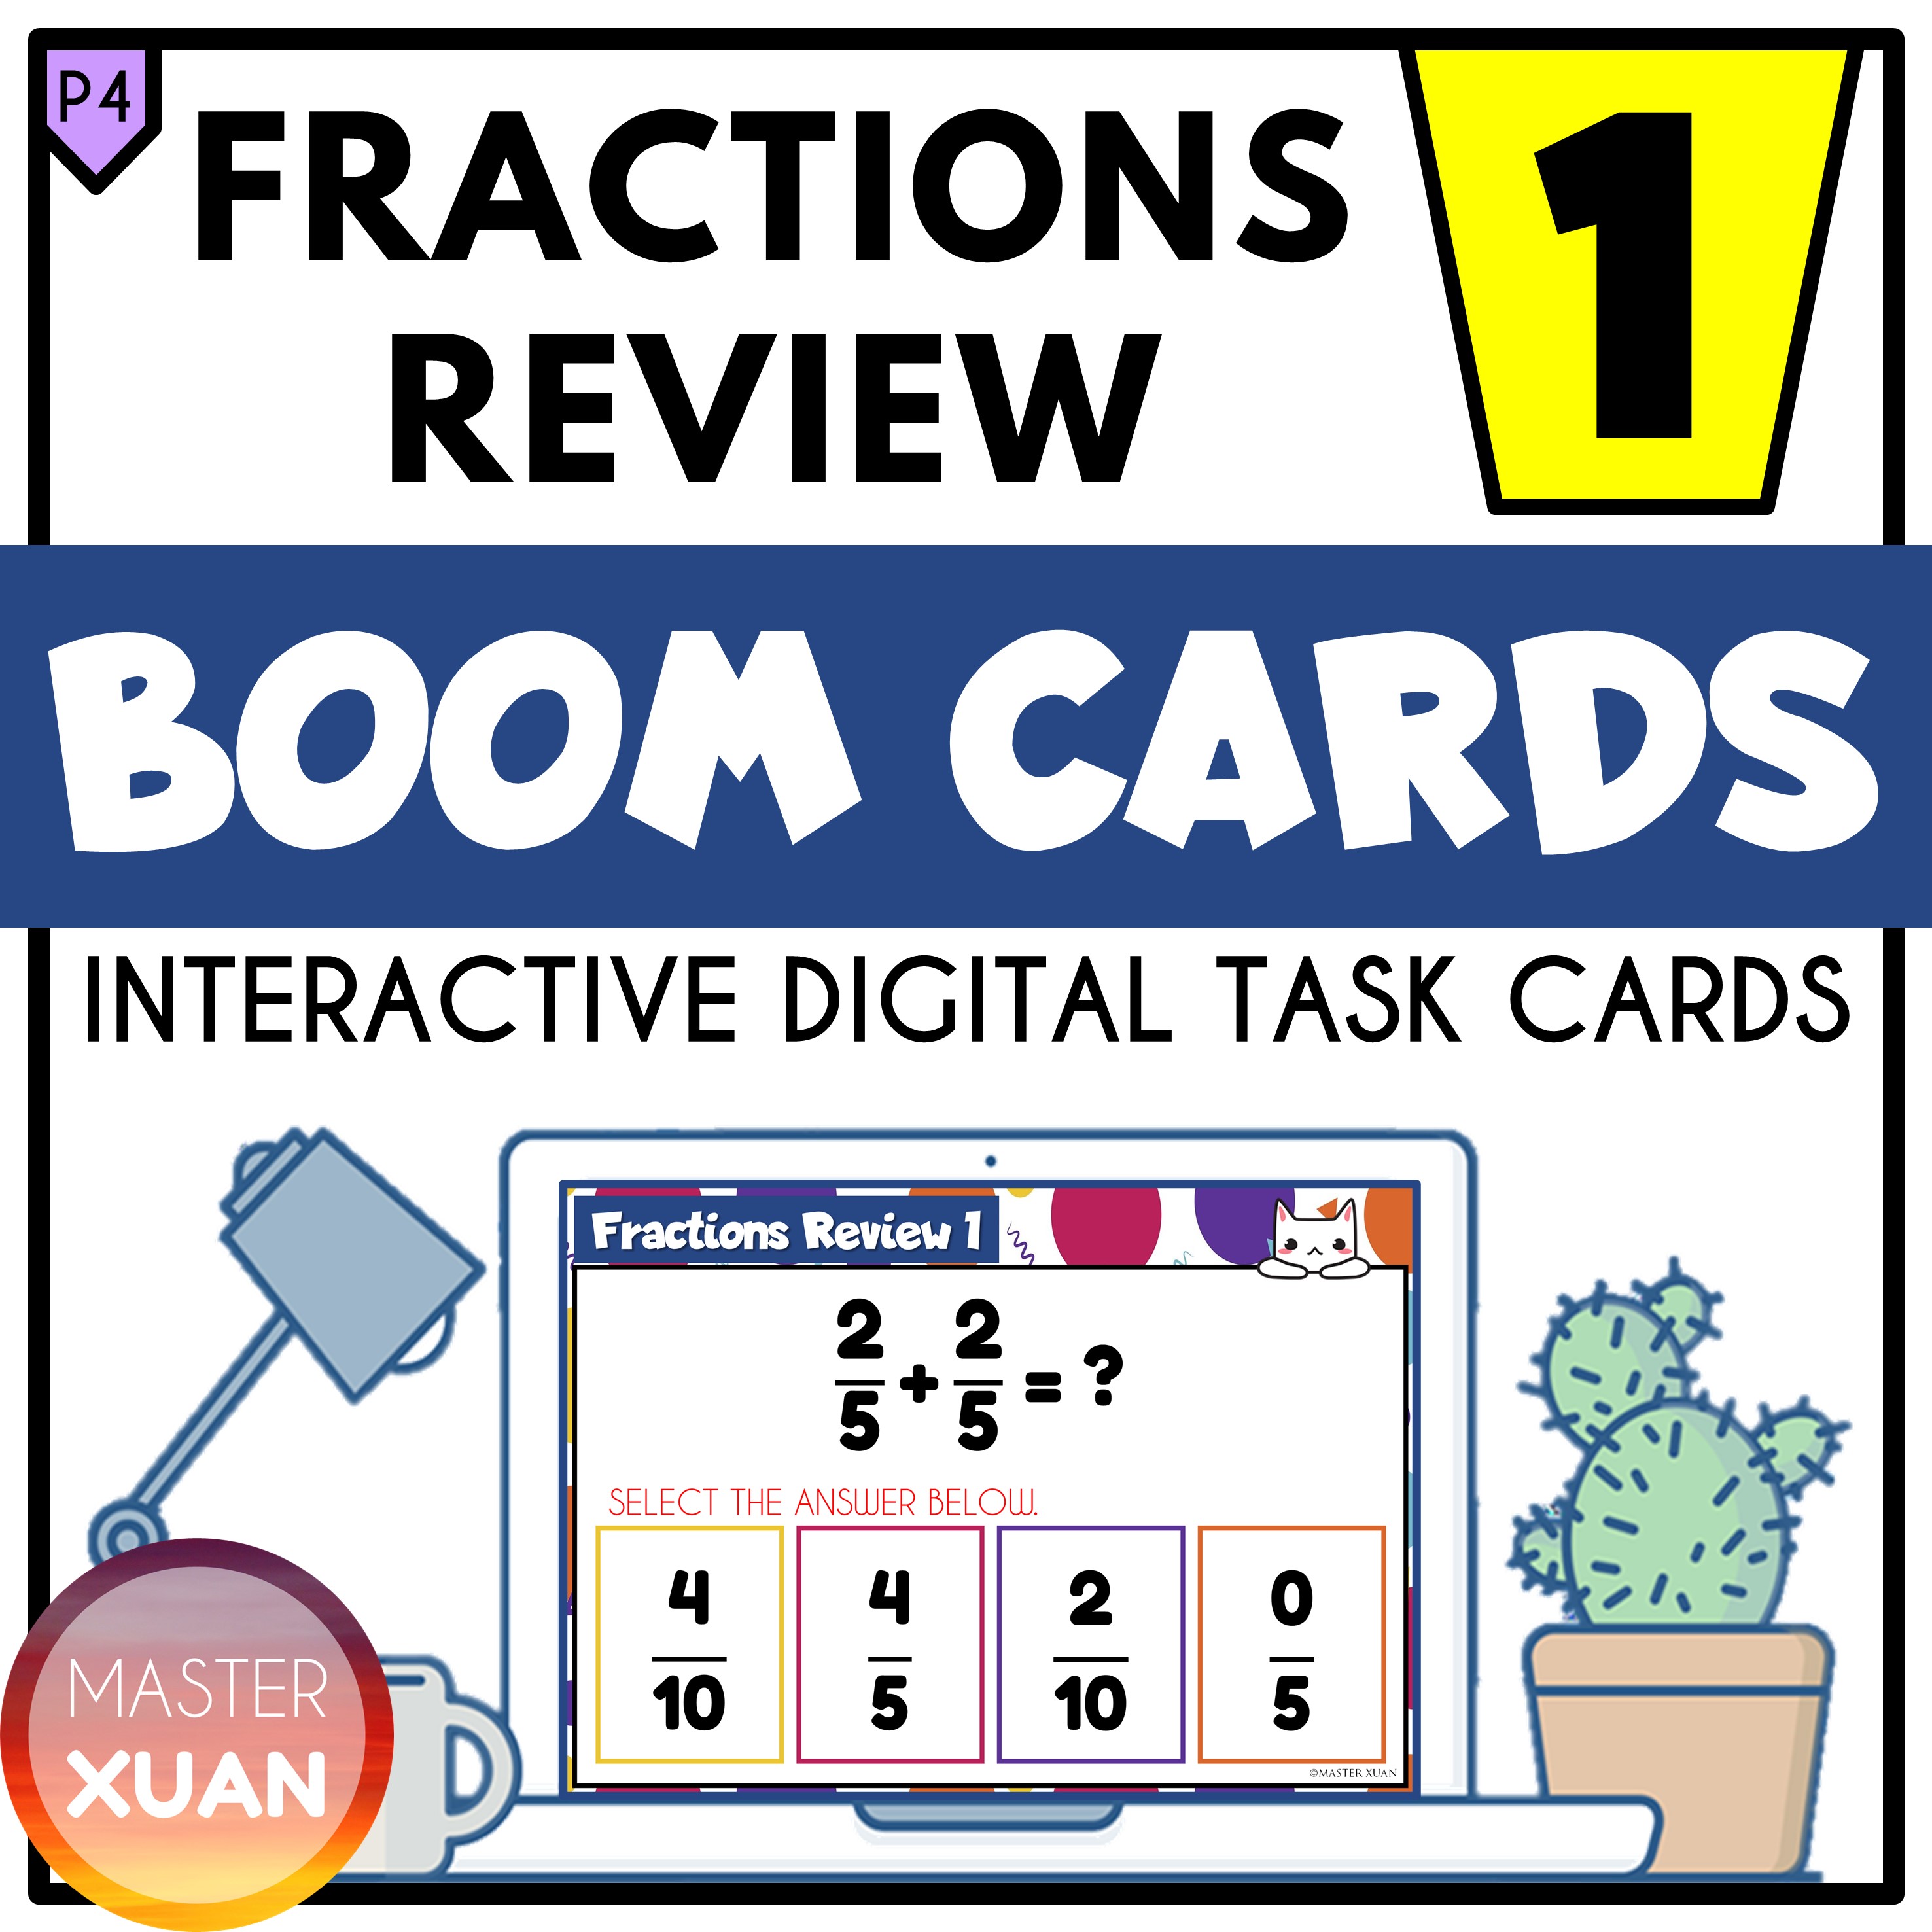 4th grade fractions review boom cards